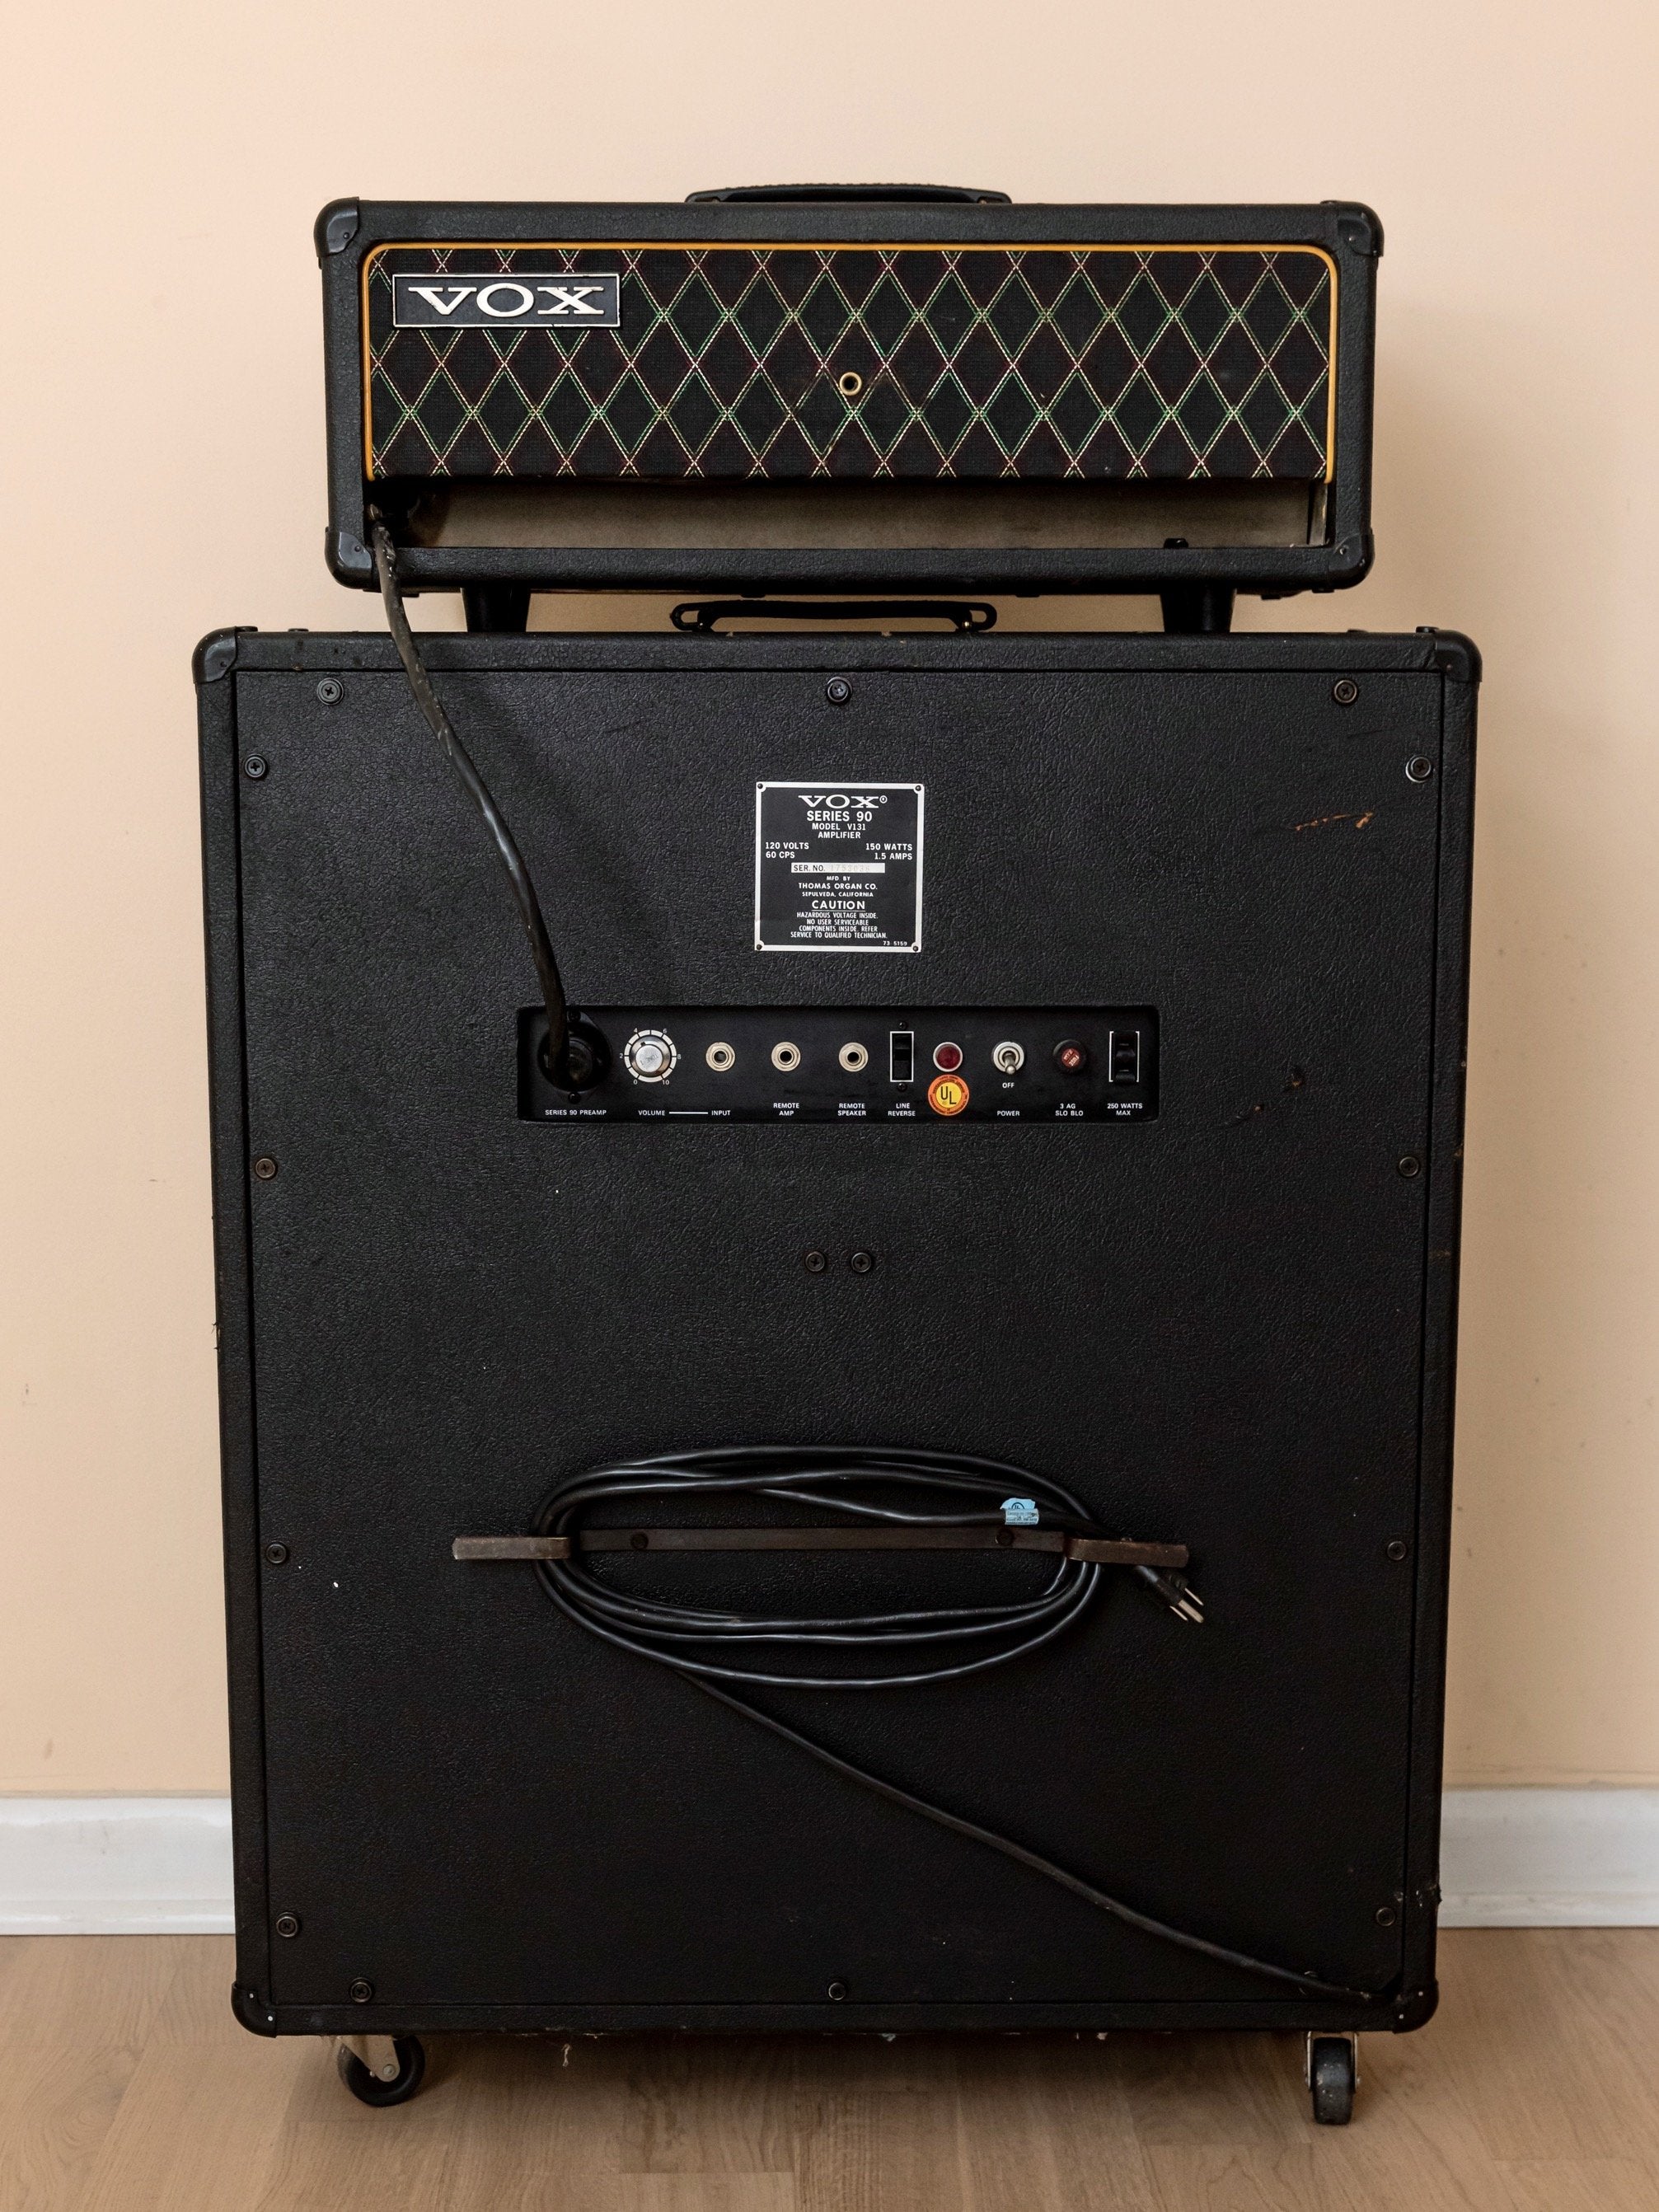 1969 Vox Series 90 Vintage Amp Head & Cab w/ Celestion Silver Bell T1656 Speakers